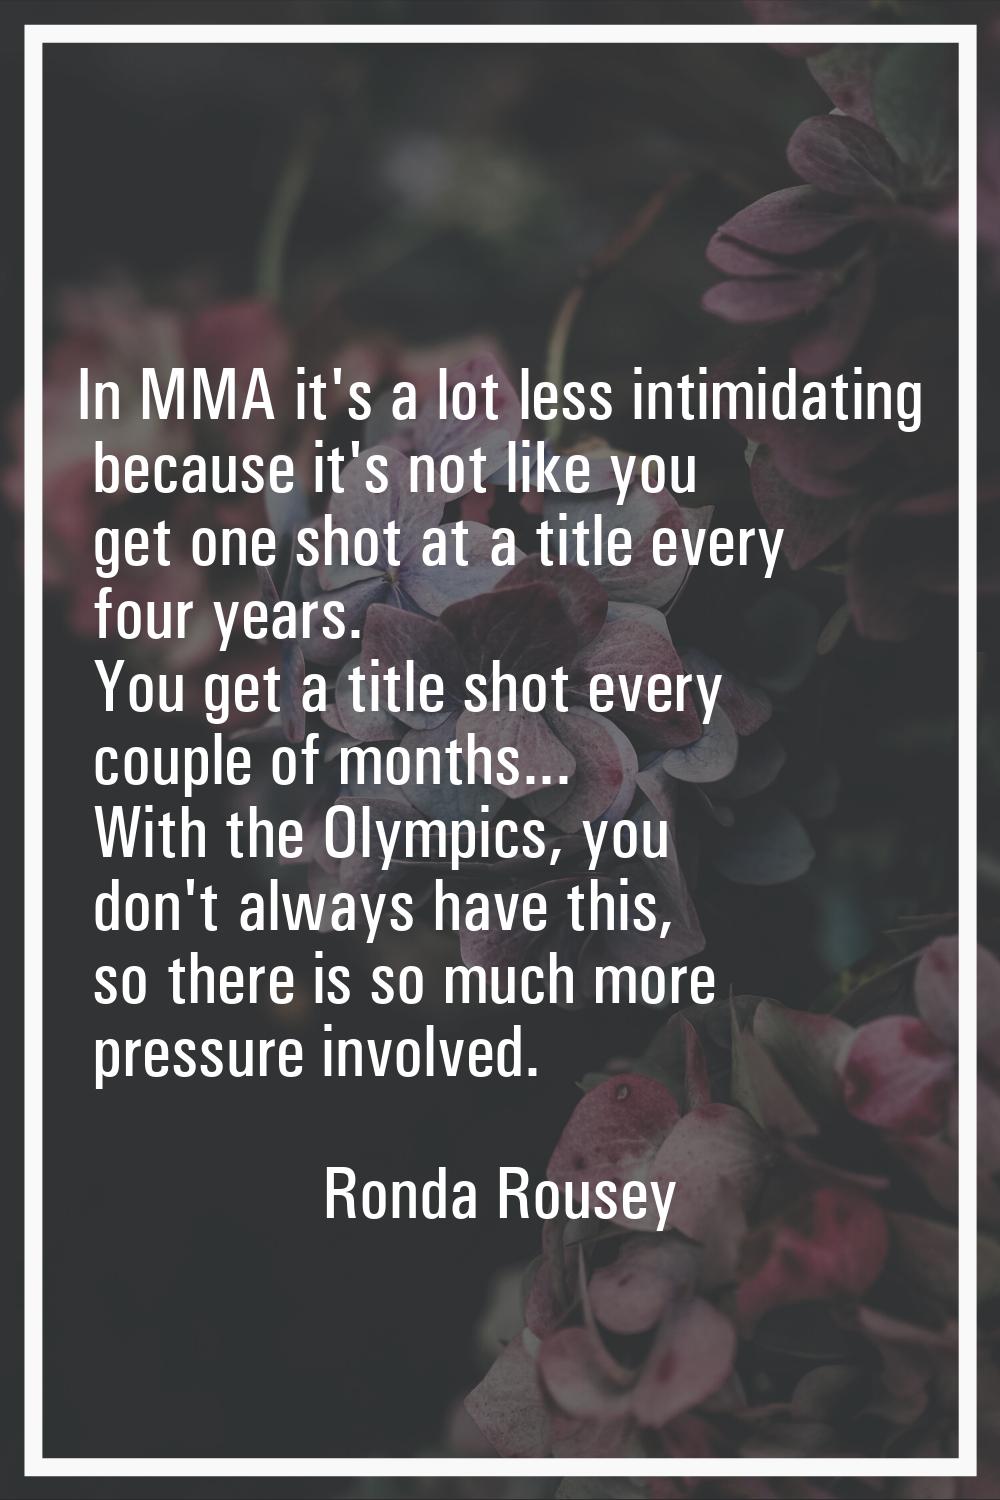 In MMA it's a lot less intimidating because it's not like you get one shot at a title every four ye